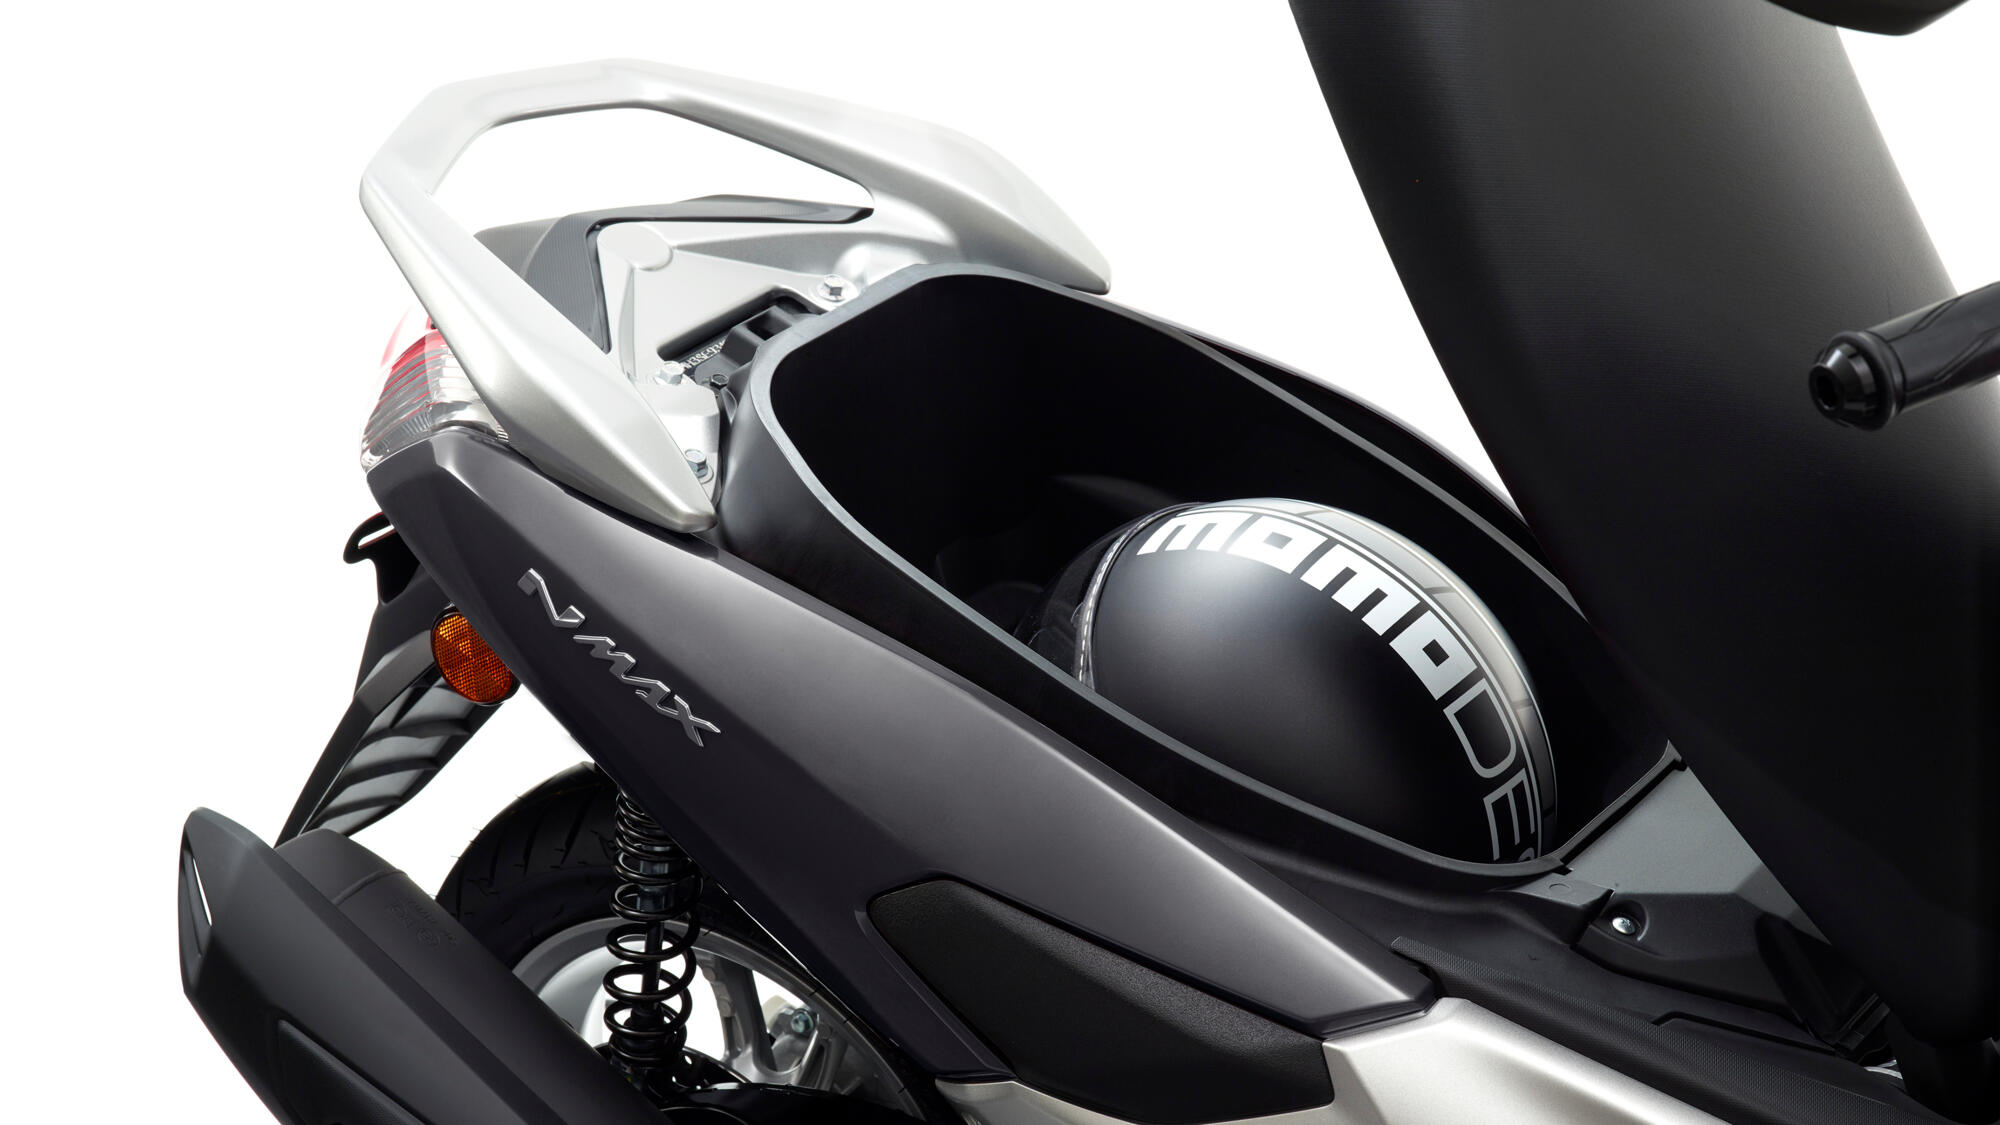 Yamaha NMAX 125 - Features and Technical Specifications